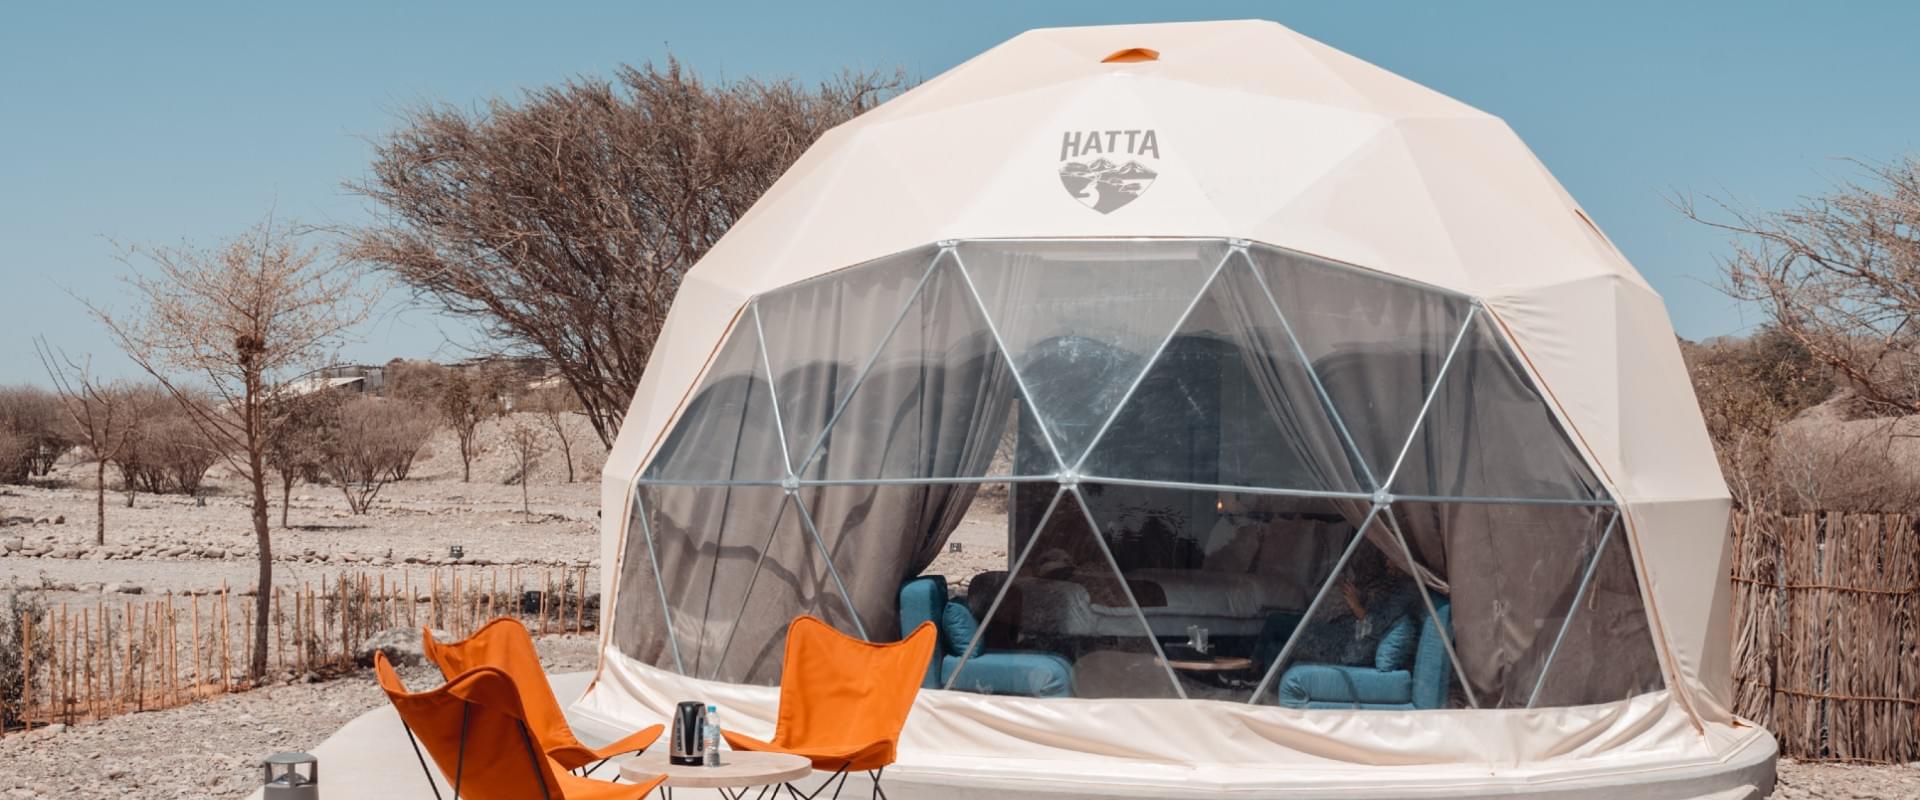 Luxury Glamping at Hatta Dome Park Overview